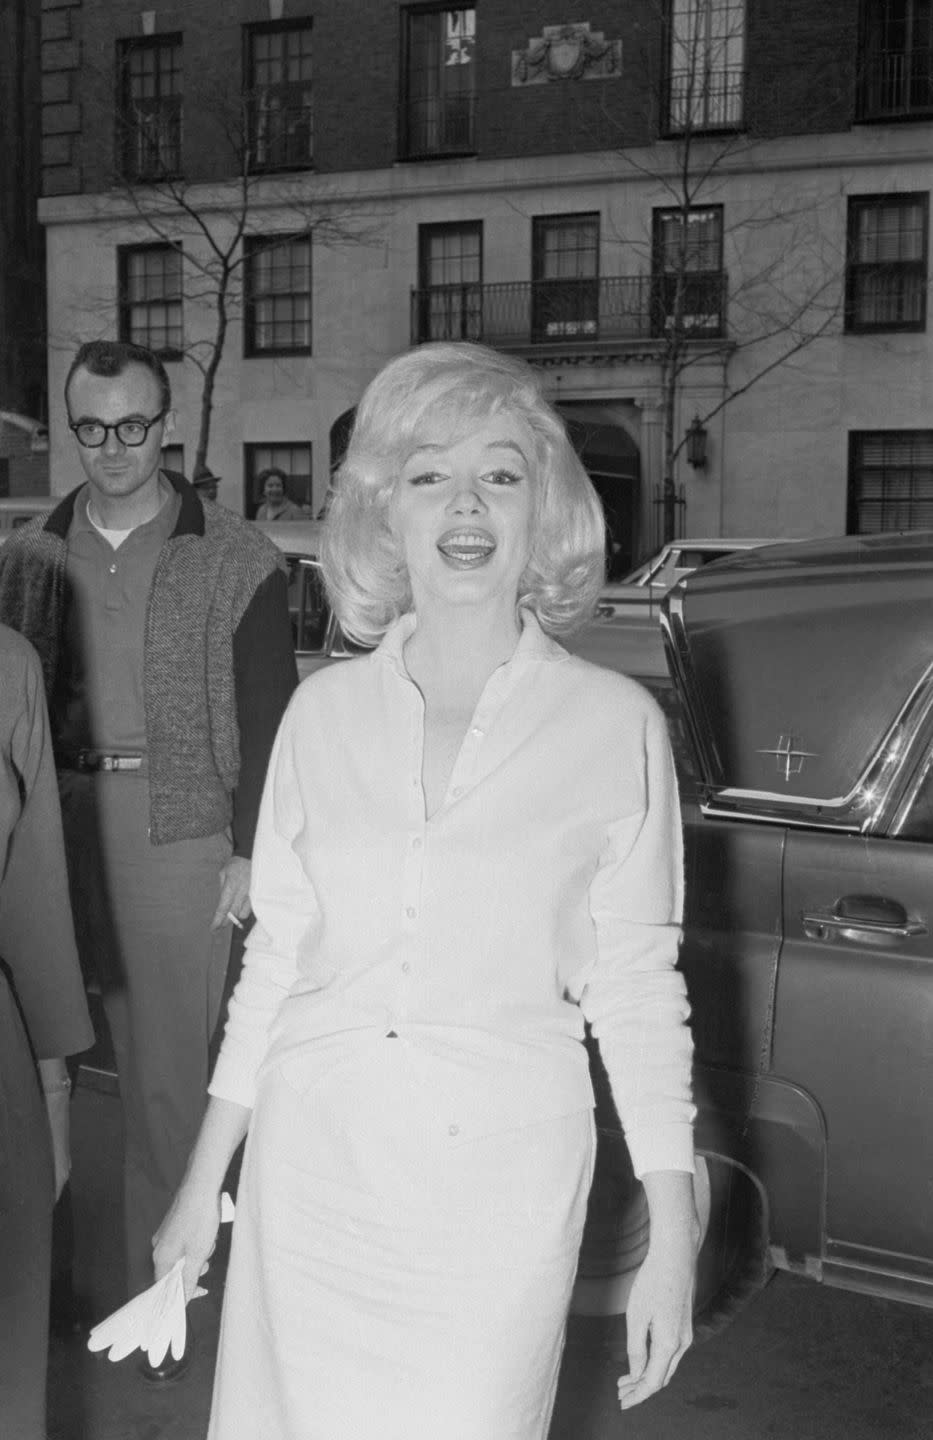 <p>Marilyn struggled with depression and prescription drug addiction, and in February 1961, she was admitted to a psychiatric hospital in New York for "exhaustion." Her ex-husband DiMaggio helped get her released. </p>